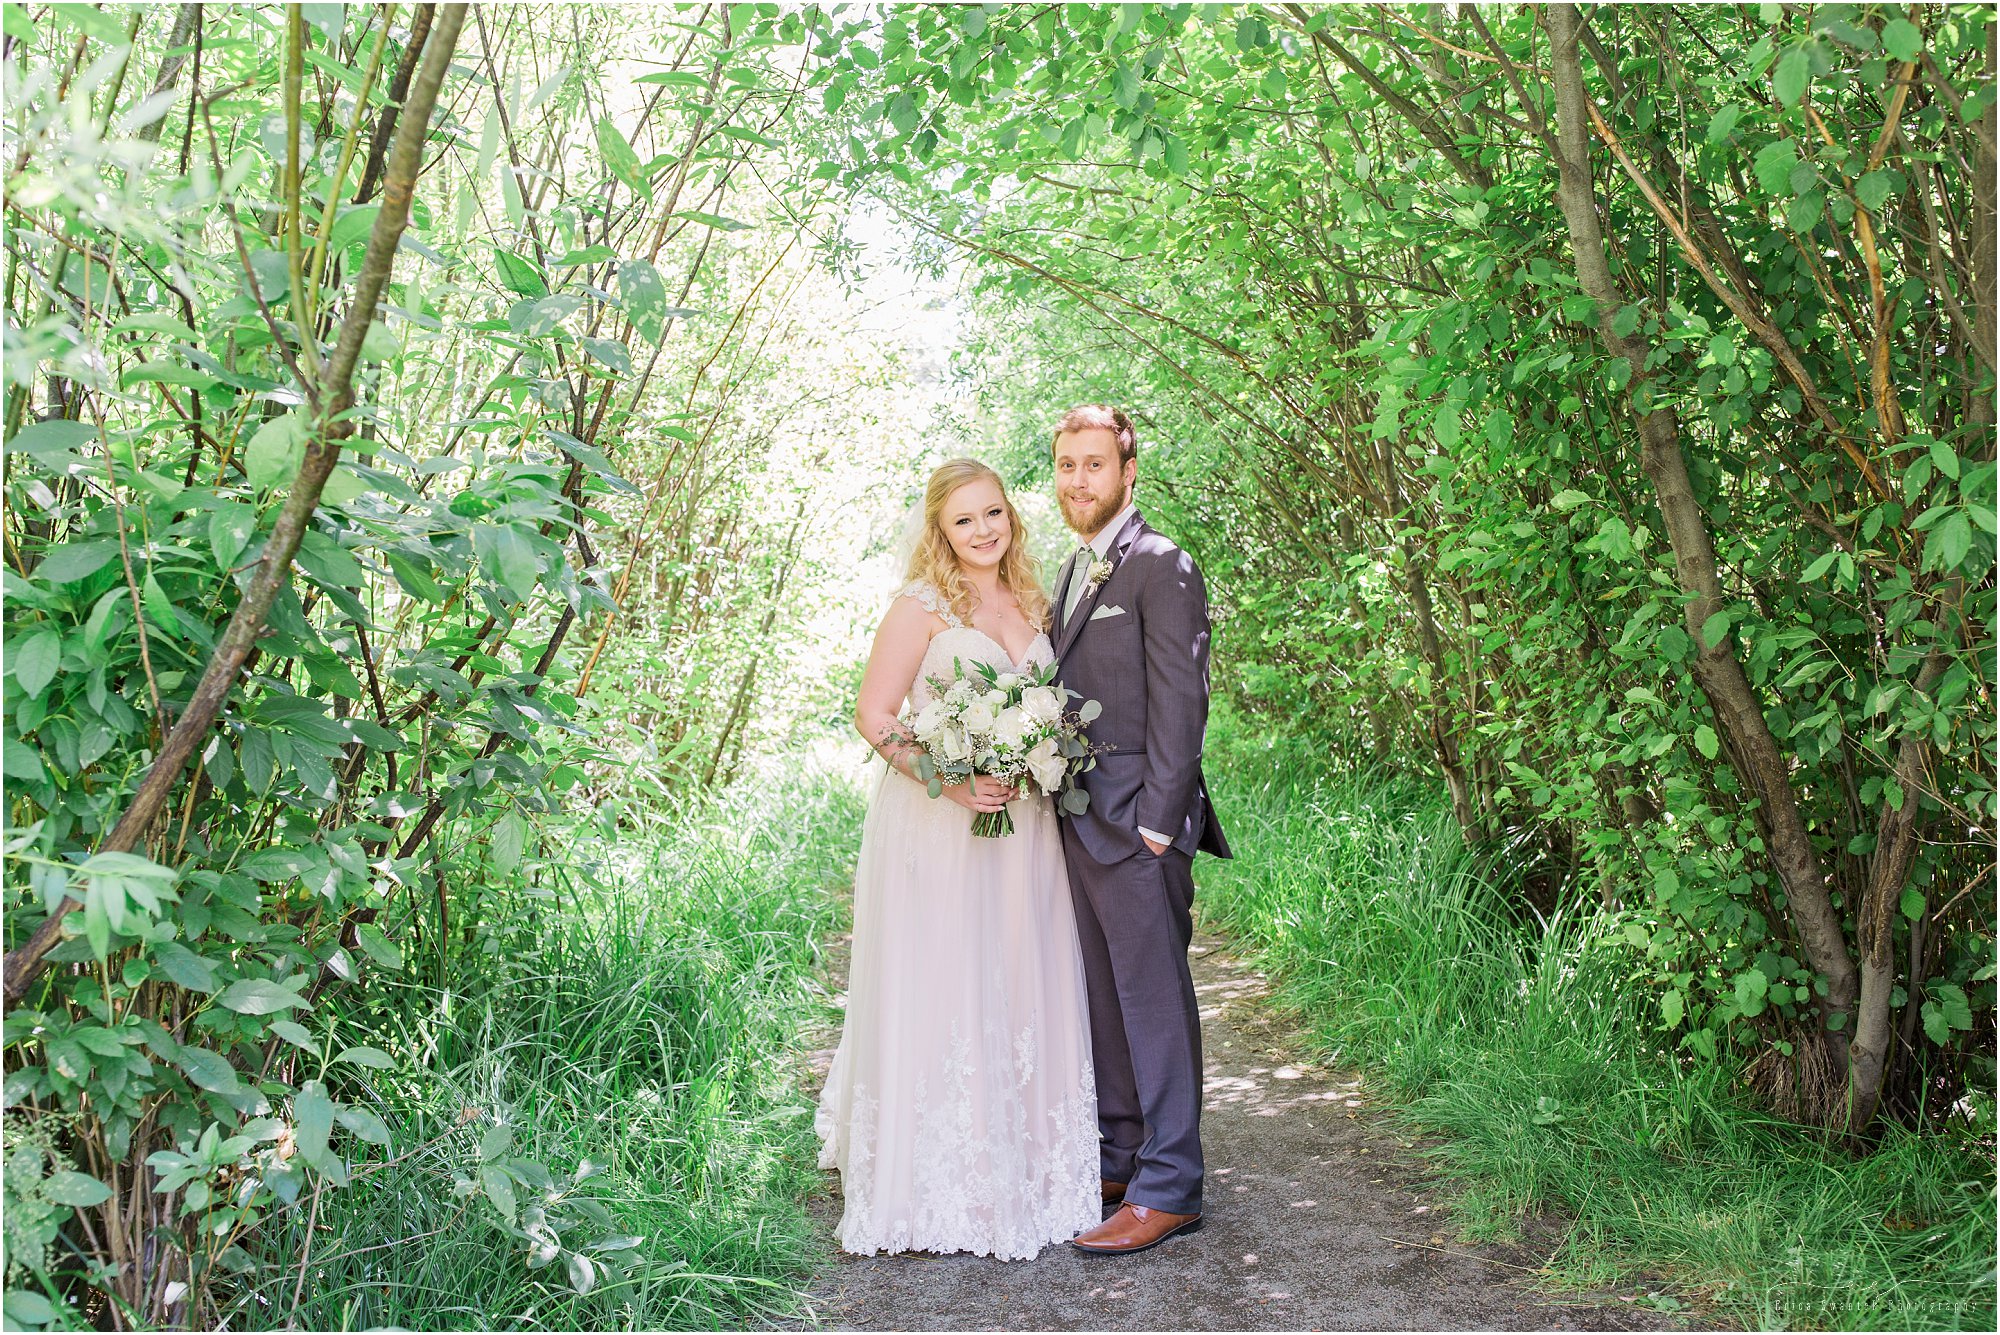 A beautiful smmer rustic chic wedding at Aspen Hall in Bend, OR. | Erica Swantek Photography